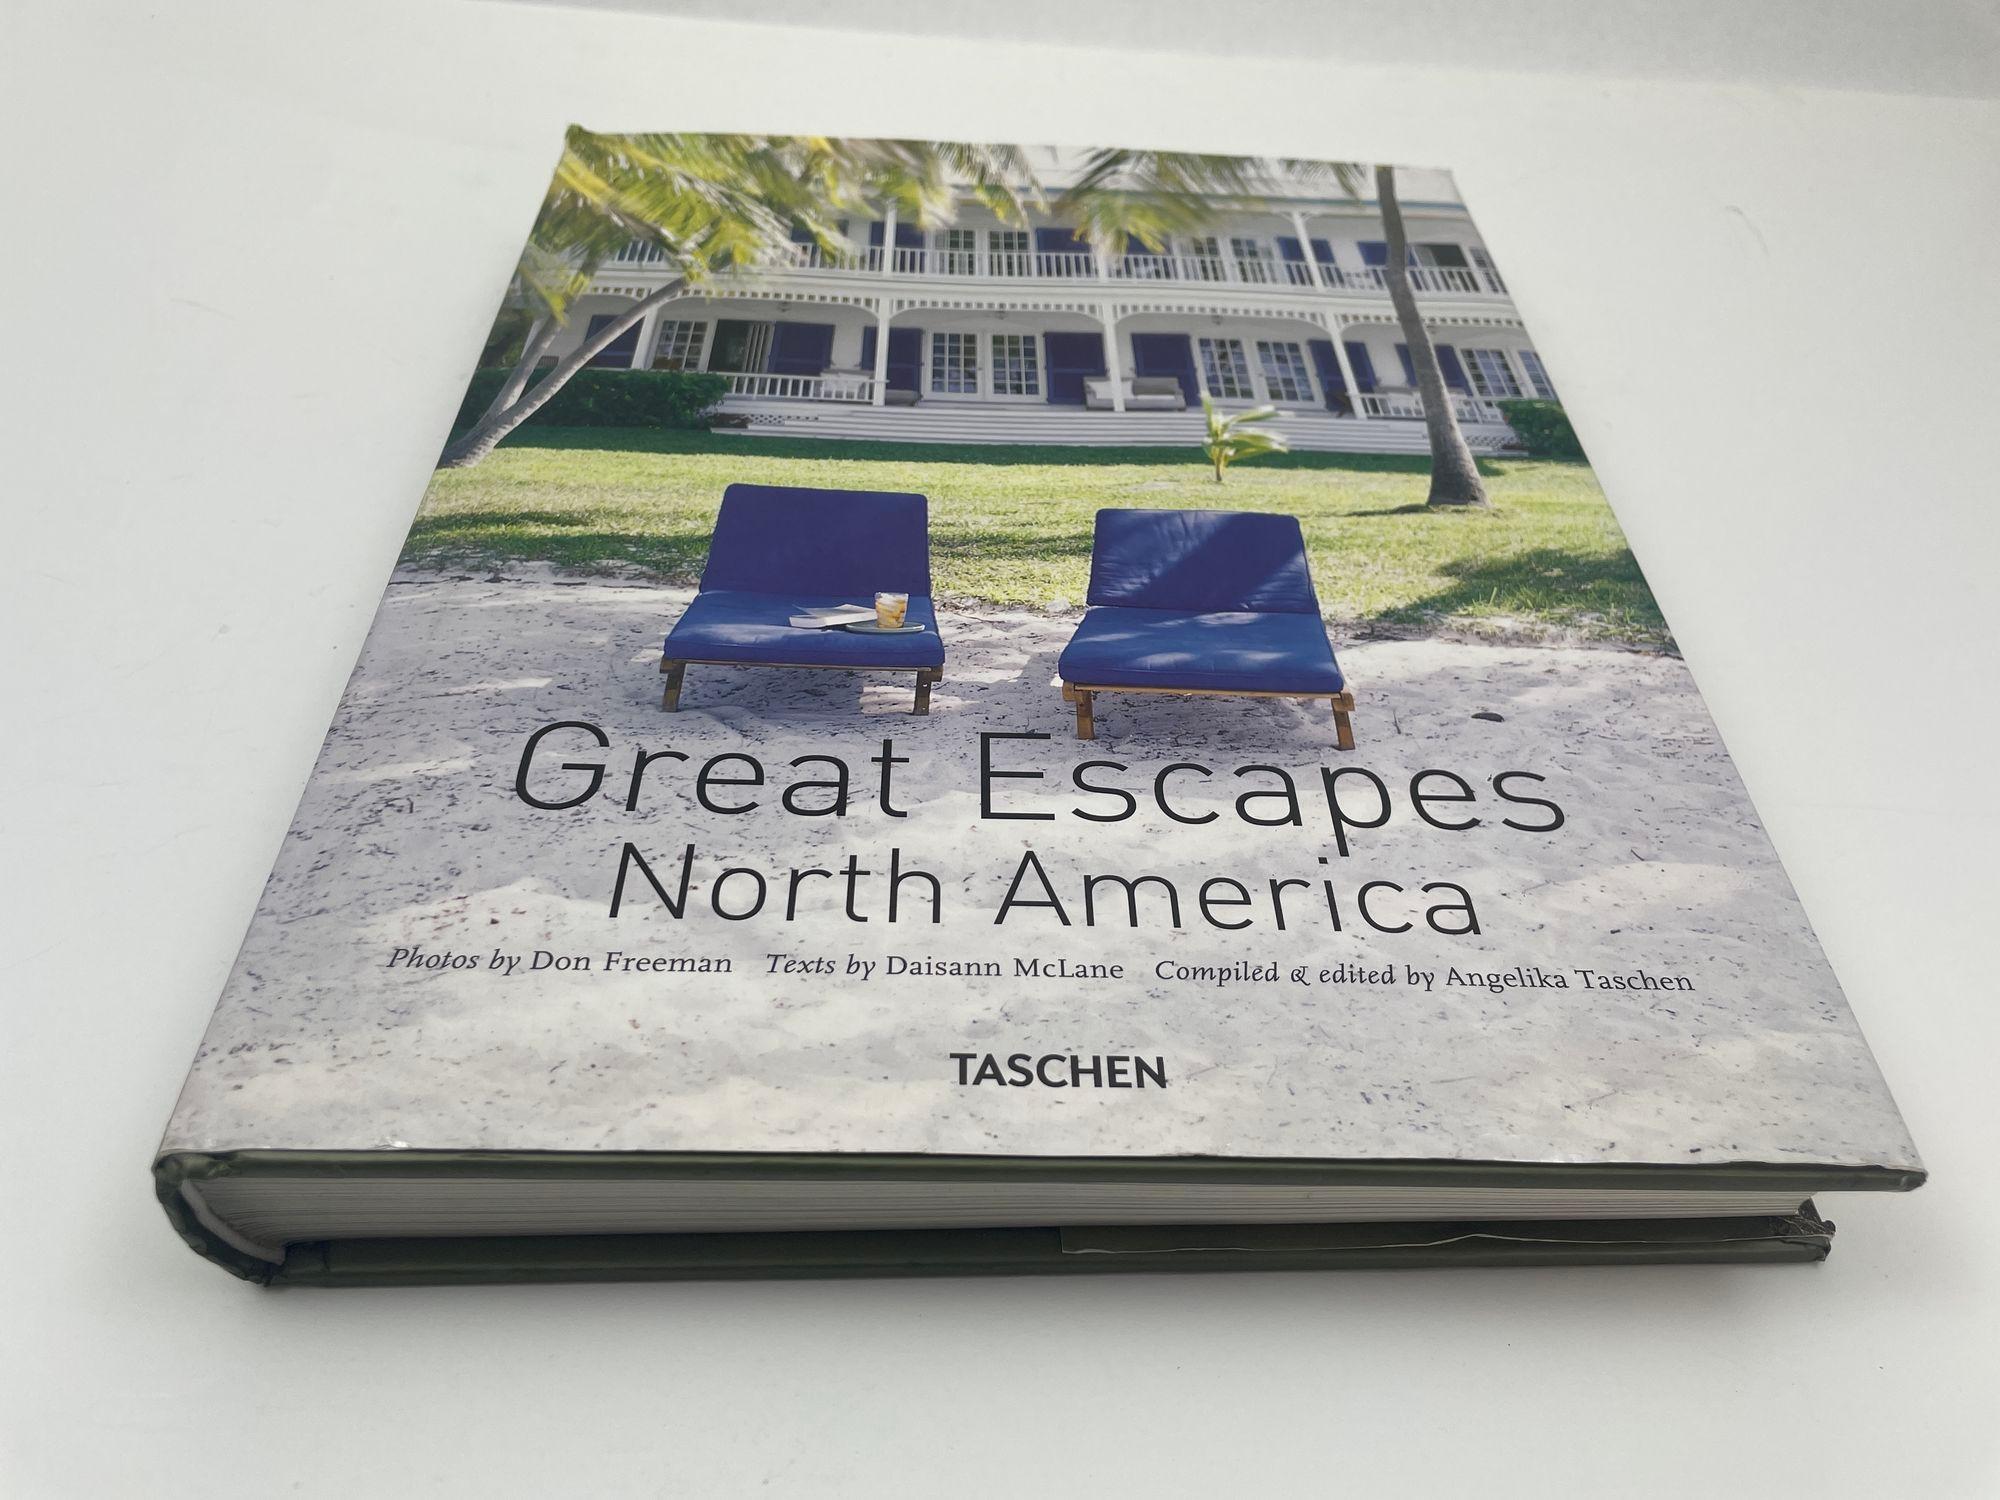 Great Escapes North America Daisann McLane Taschen.Title: Great Escapes North AmericaPublisher: TaschenPublication Date: 2015Binding: Hardcover.
From dazzling cities to eccentric small towns, from vast mountains to plains as far as the eye can see,